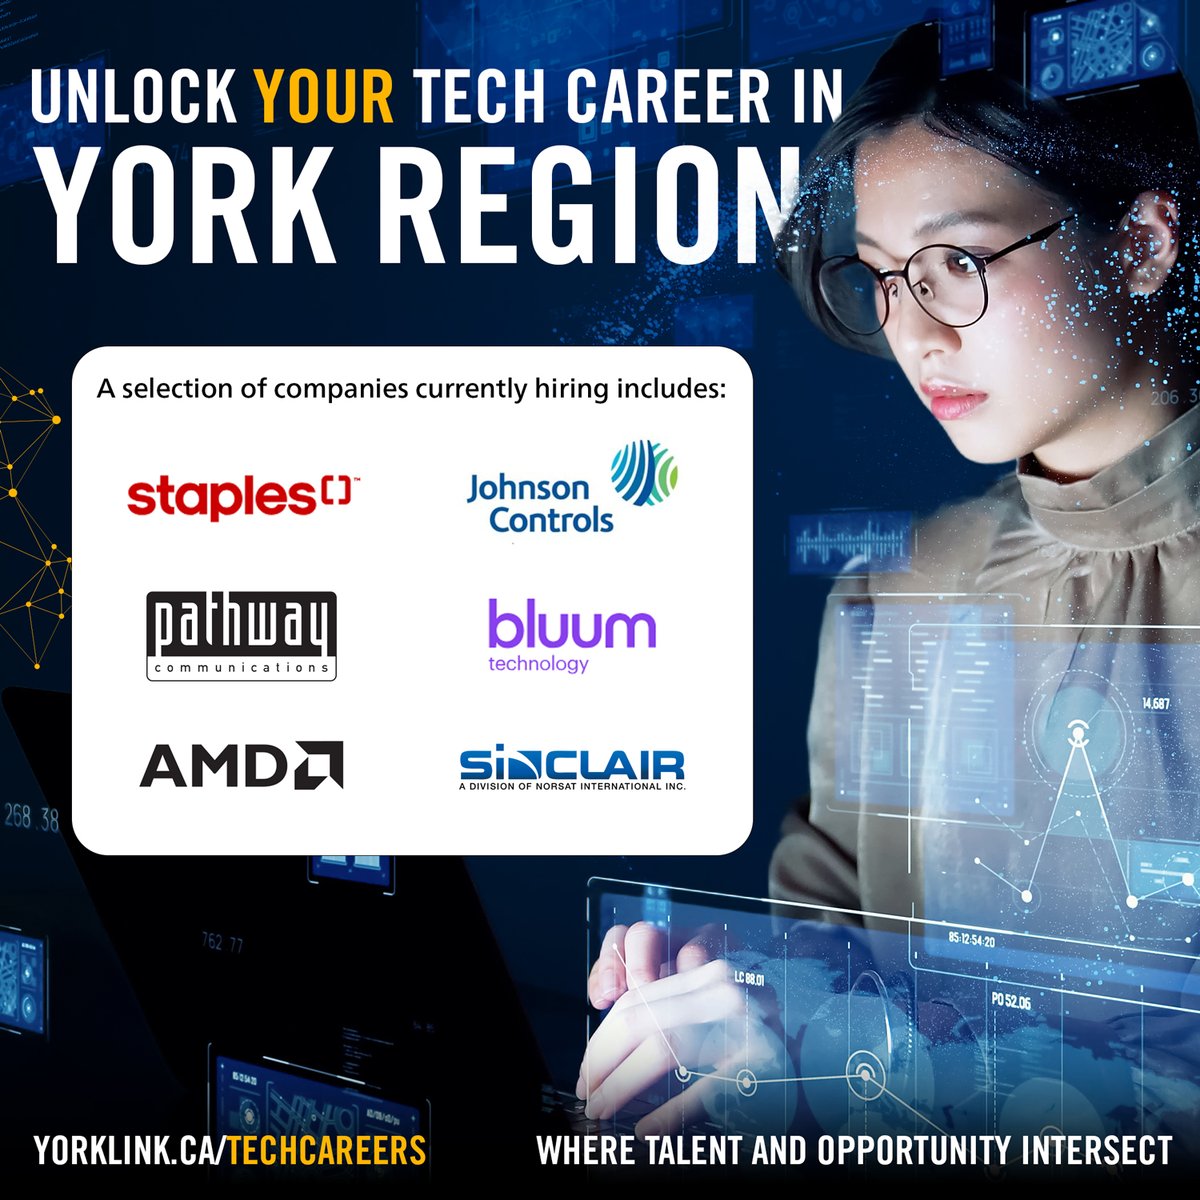 Your next career move is out there! Search for tech jobs in the #YRtech ecosystem with our job board. Companies hiring include Staples, Johnson Controls, Pathway Communications, Bluum Technology, AMD, Sinclair Technologies, and more! Start your search now: yorklink.ca/techcareers